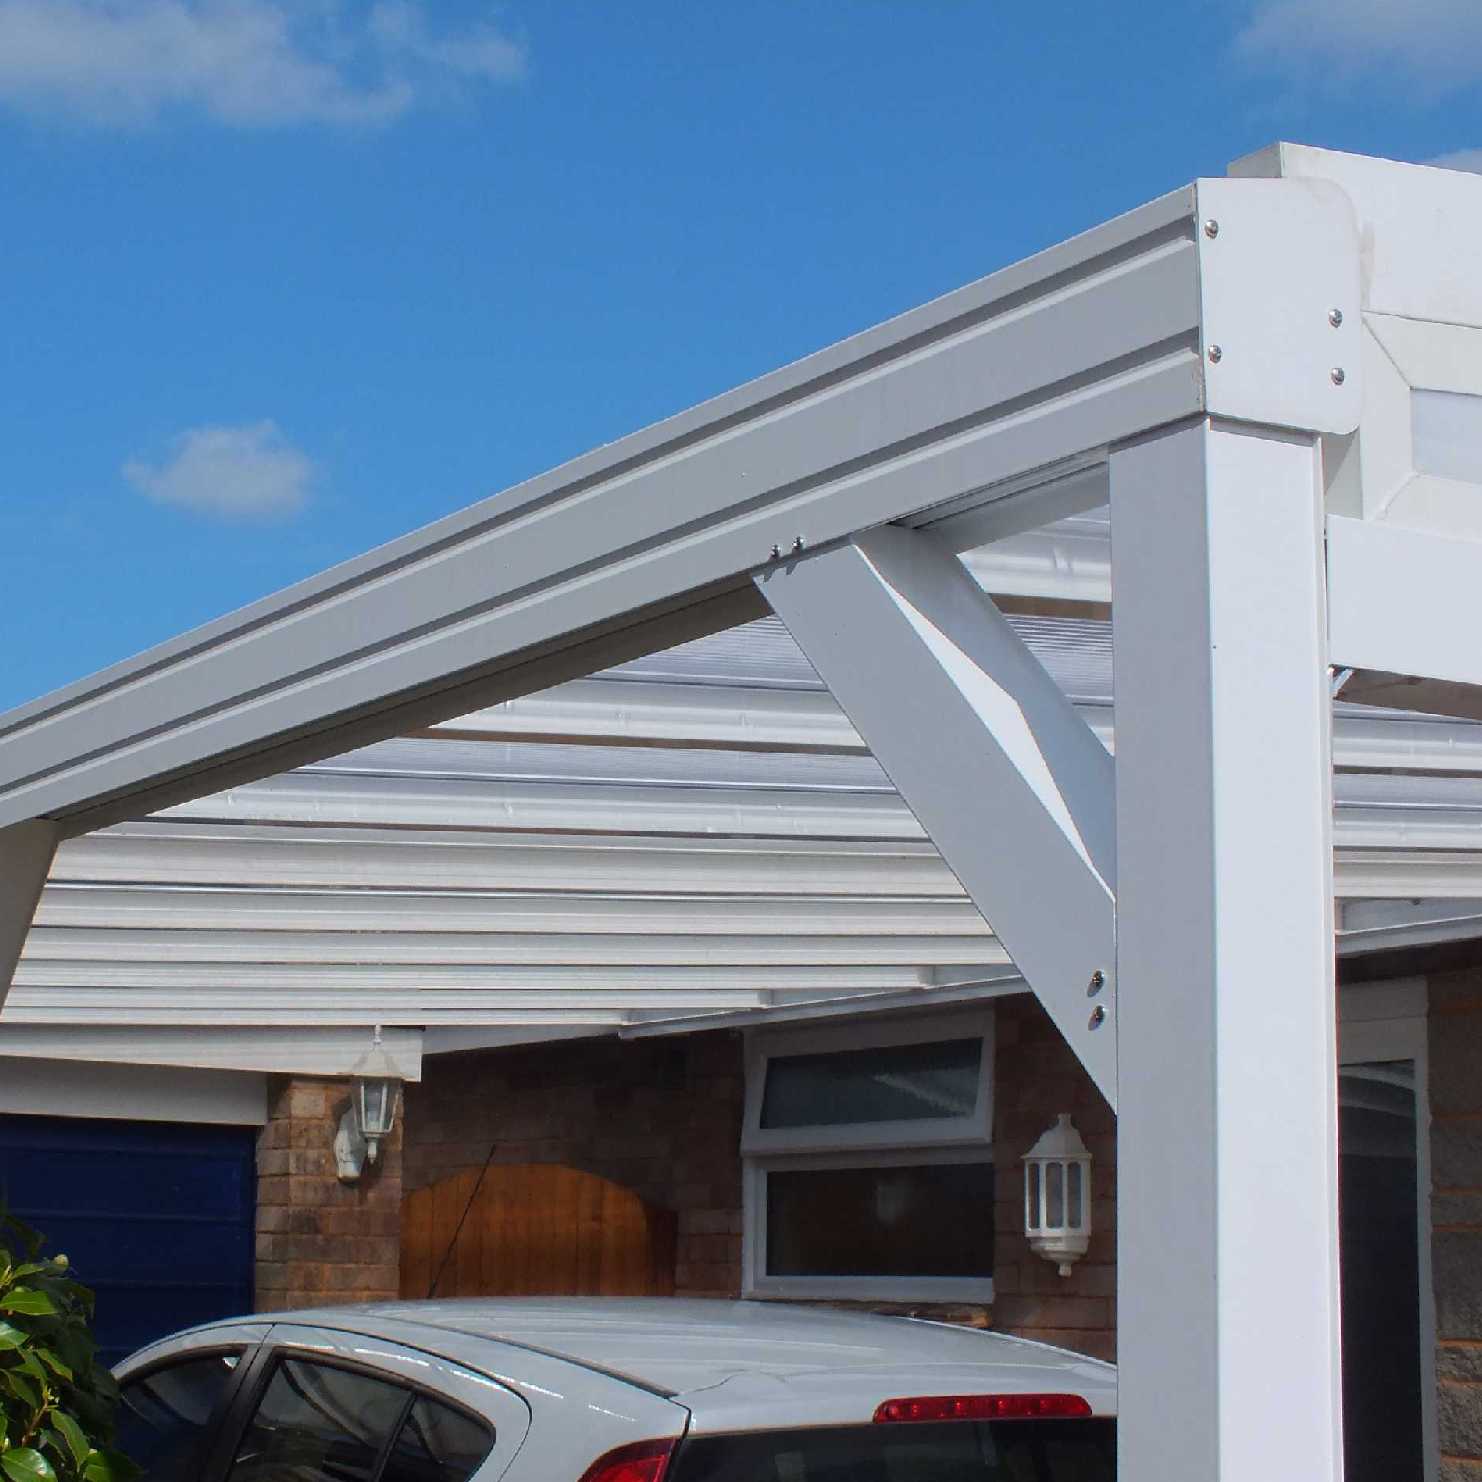 Buy Omega Smart Lean-To Canopy, White with 16mm Polycarbonate Glazing - 3.1m (W) x 3.0m (P), (2) Supporting Posts online today